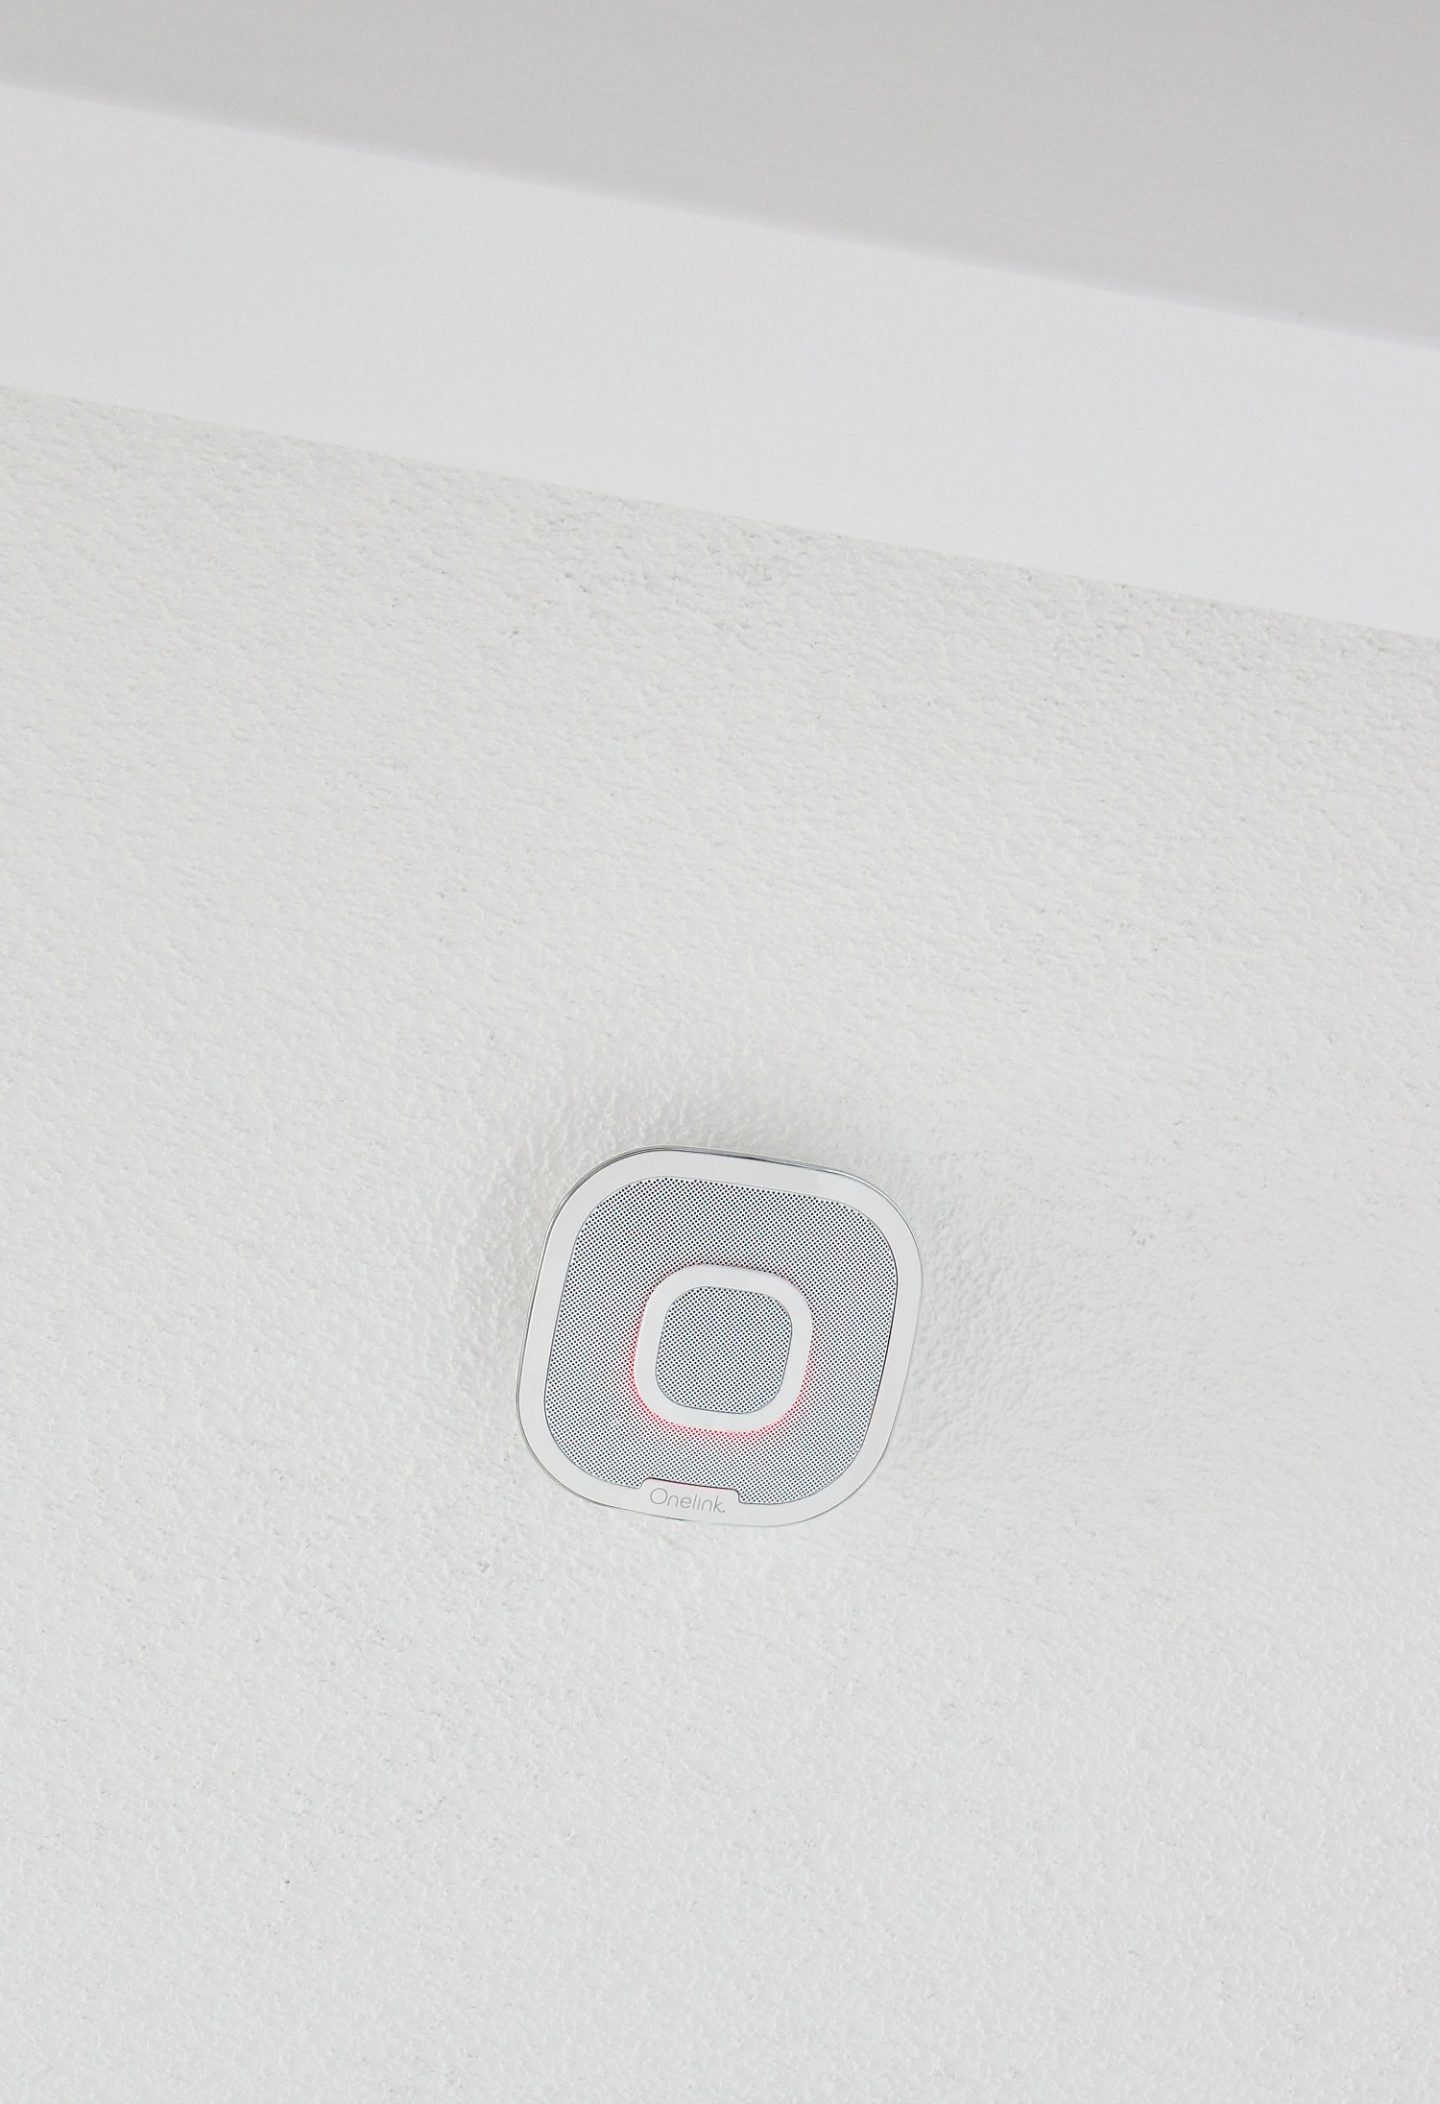 A Smarter Smoke Detector: Onelink by First Alert Review